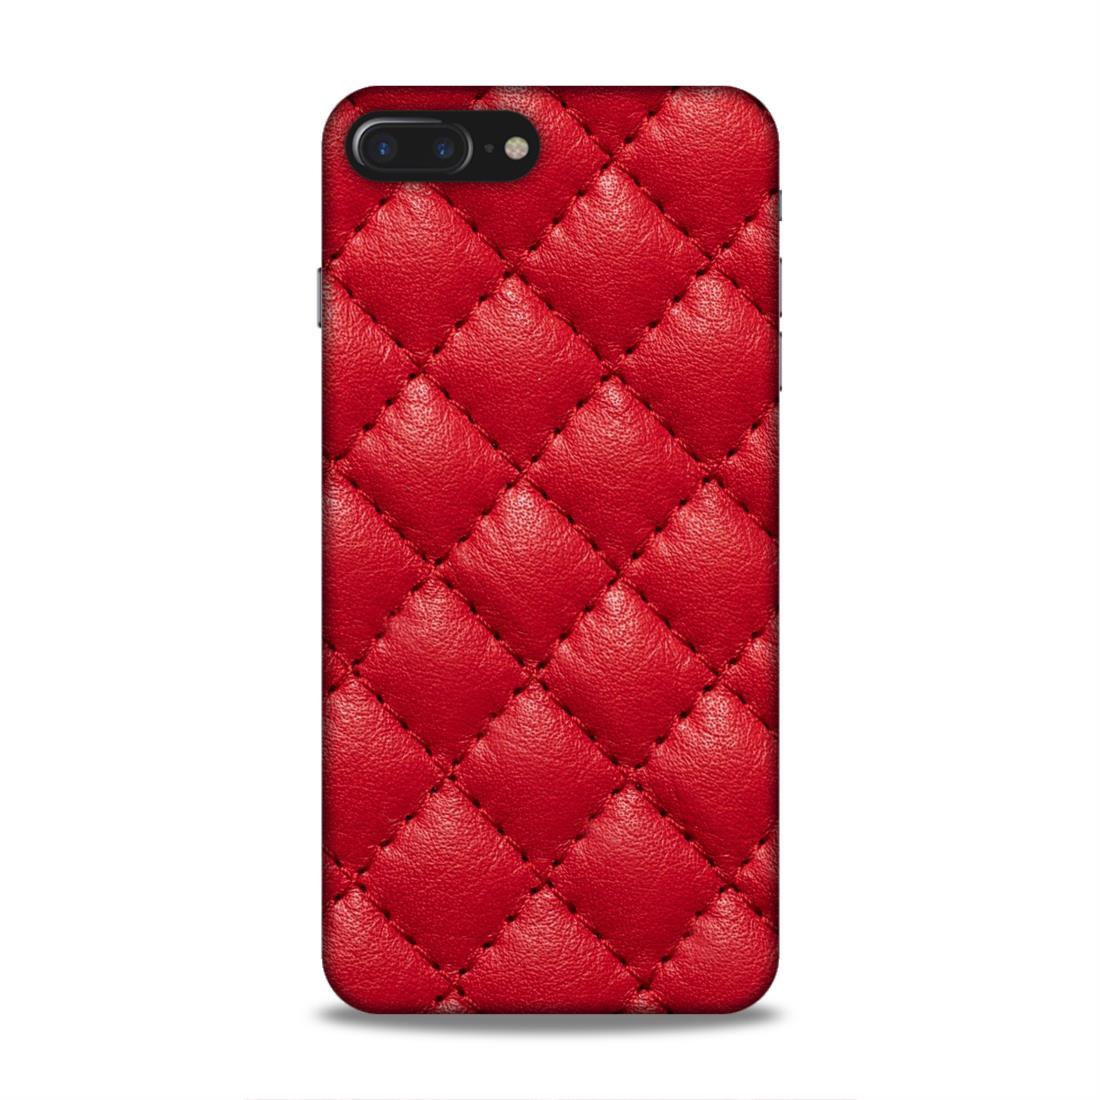 Red Square Pattern iPhone 7 Plus Phone Back Case